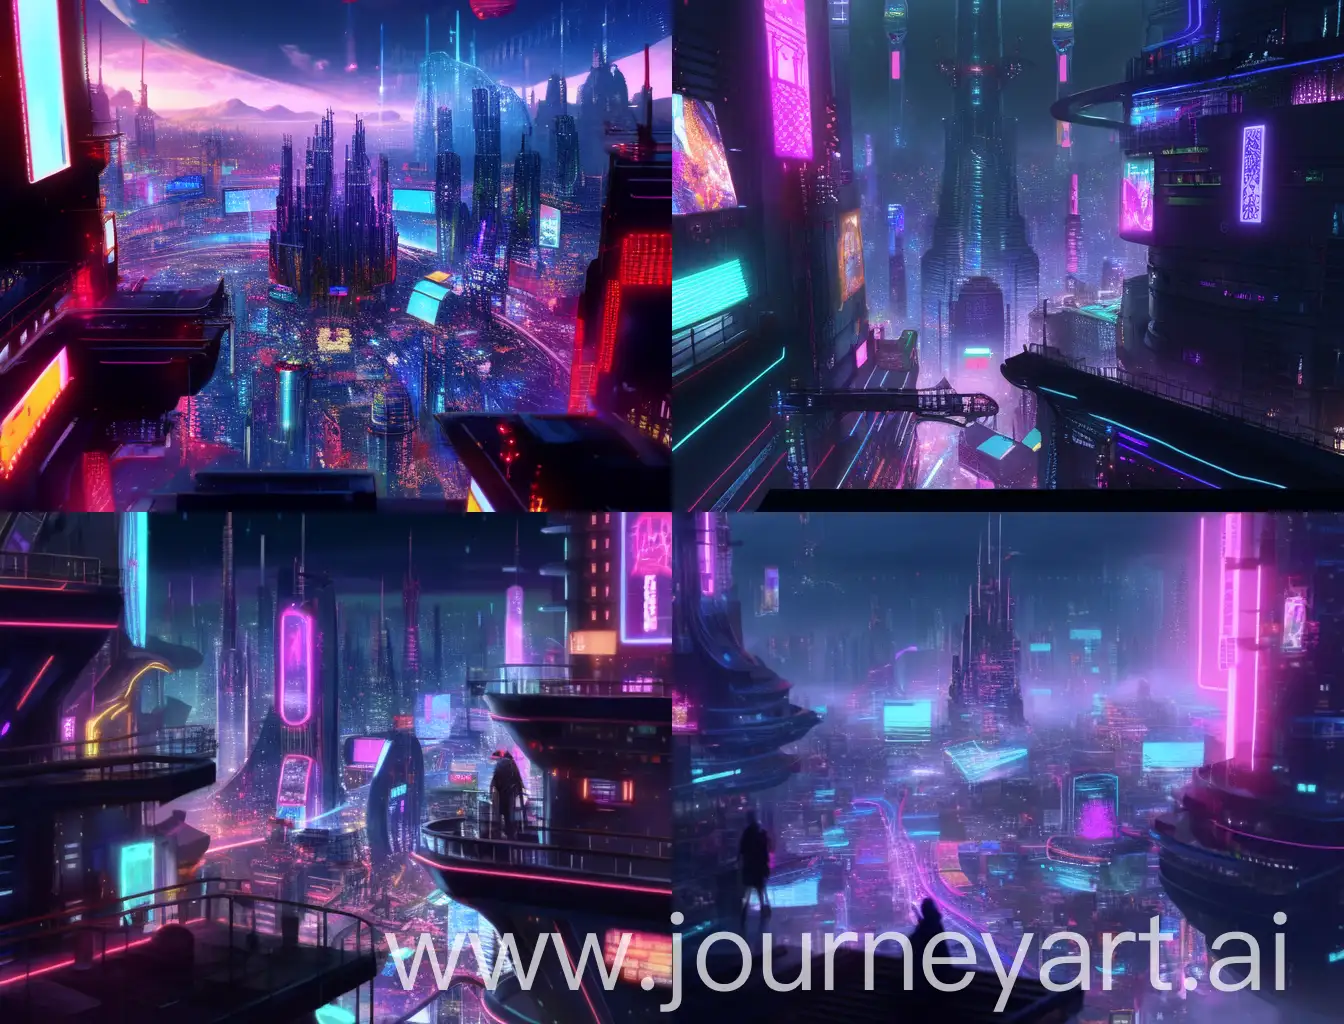 Futuristic Cyberpunk Cityscape Create a futuristic cyberpunk cityscape with towering skyscrapers, holographic ads, and bustling markets, reflecting a high-tech, neon-infused future.